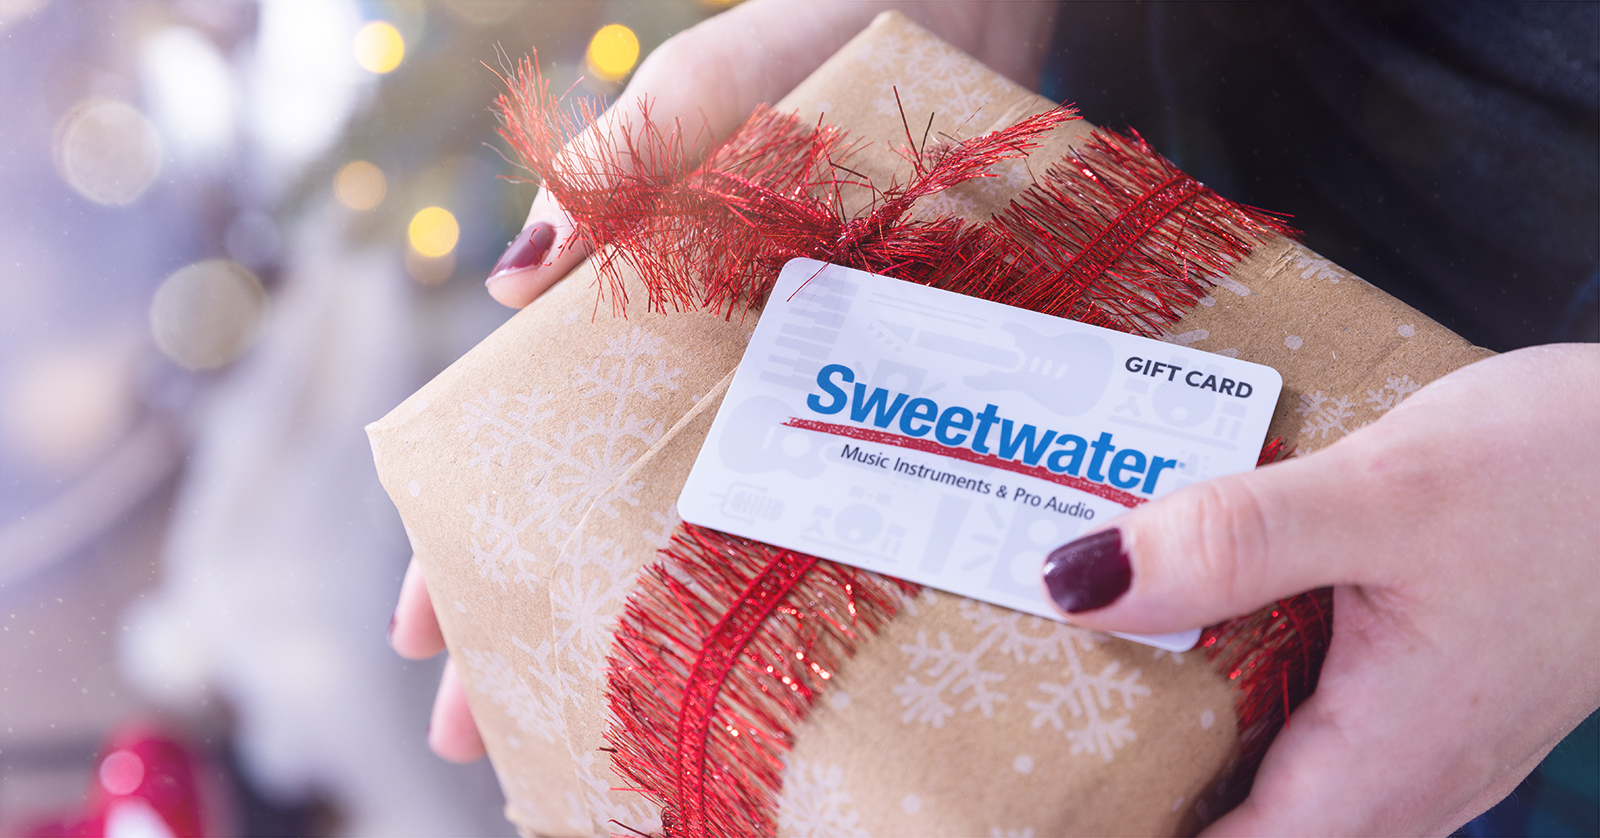 Need holiday gifts in a hurry? No worries! Enjoy FREE same-day